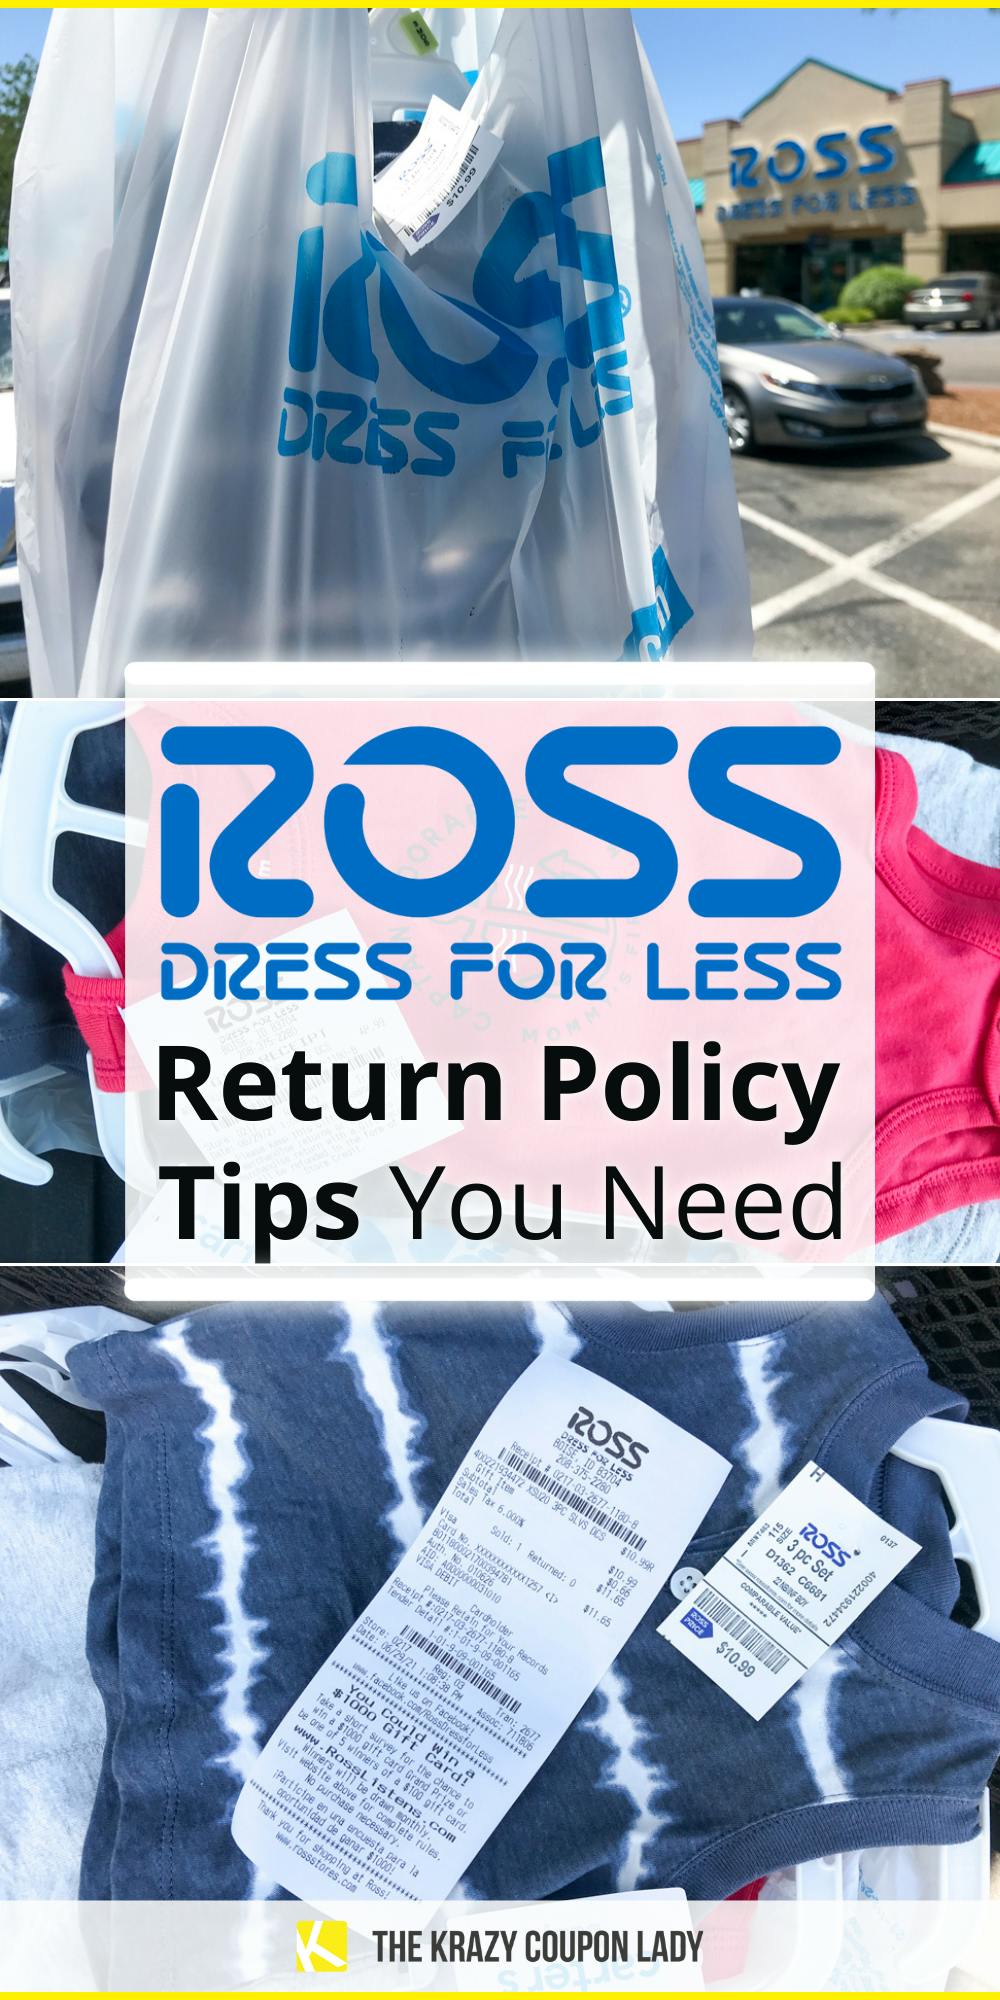 ross return policy tips pinterest v1 the krazy coupon lady 1626834735 1626834735